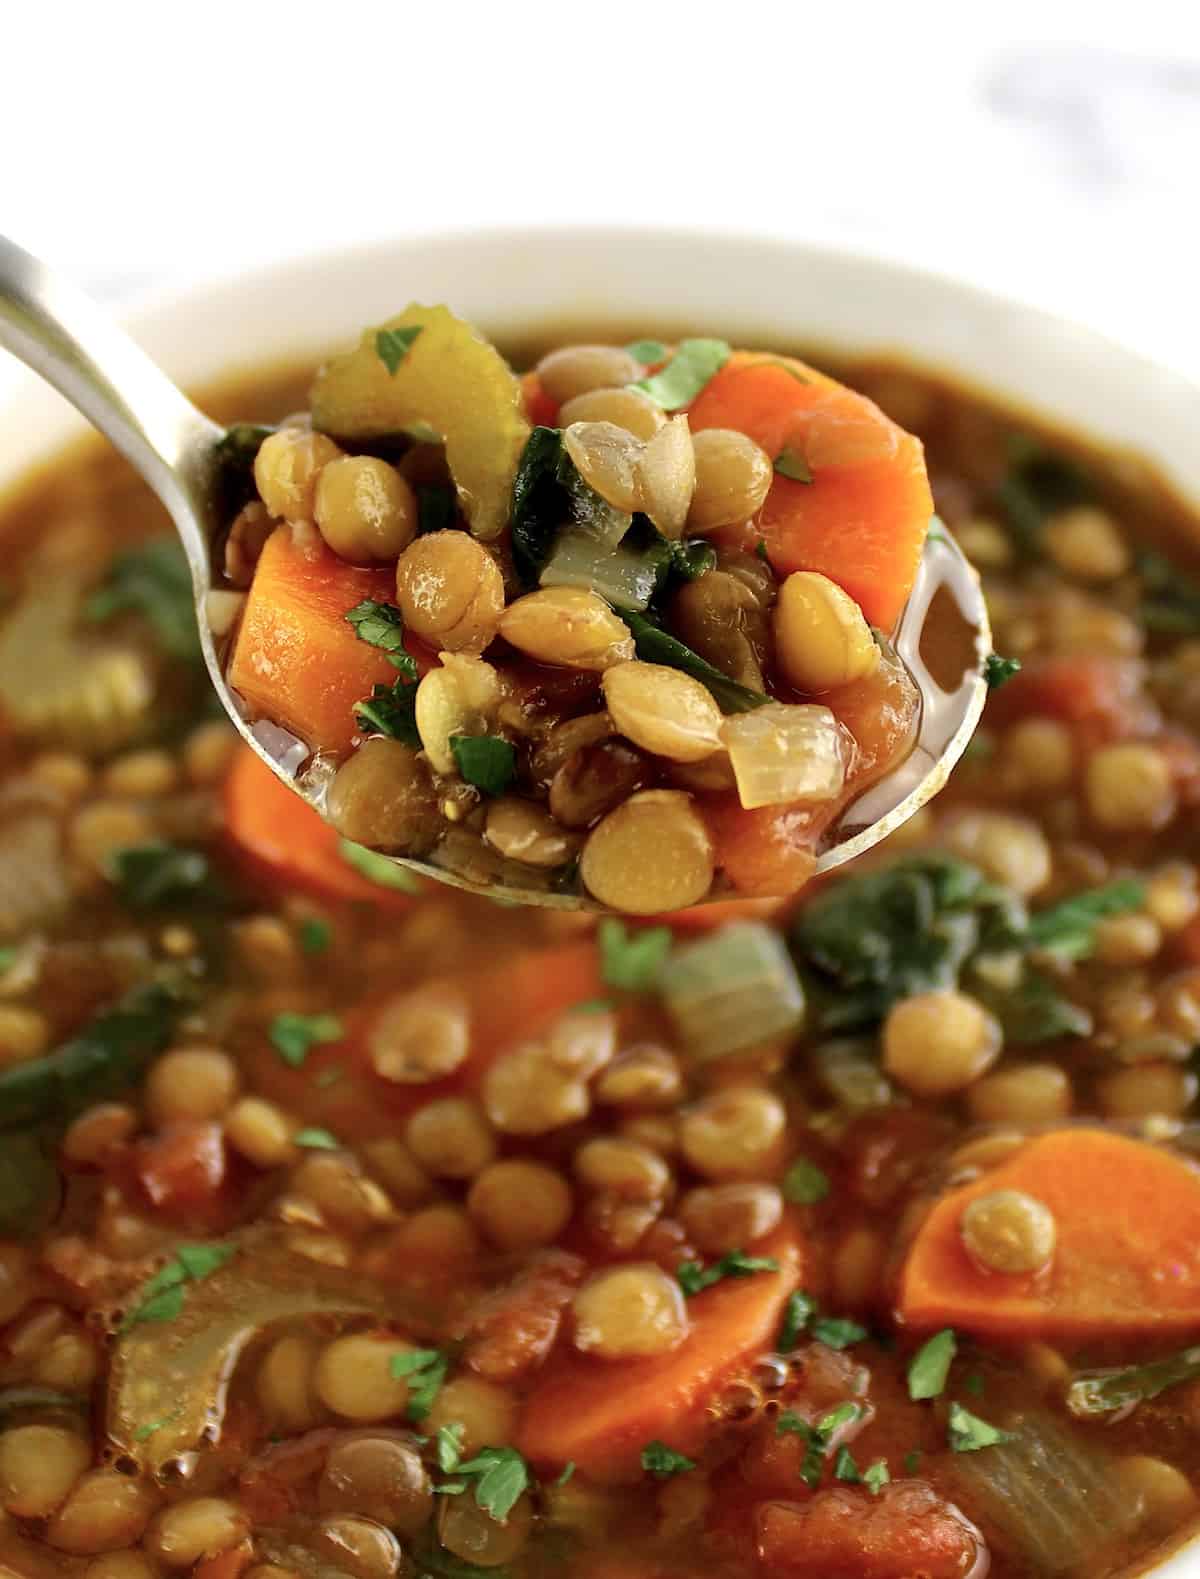 Carrot and Lentil Soup being held up with spoon